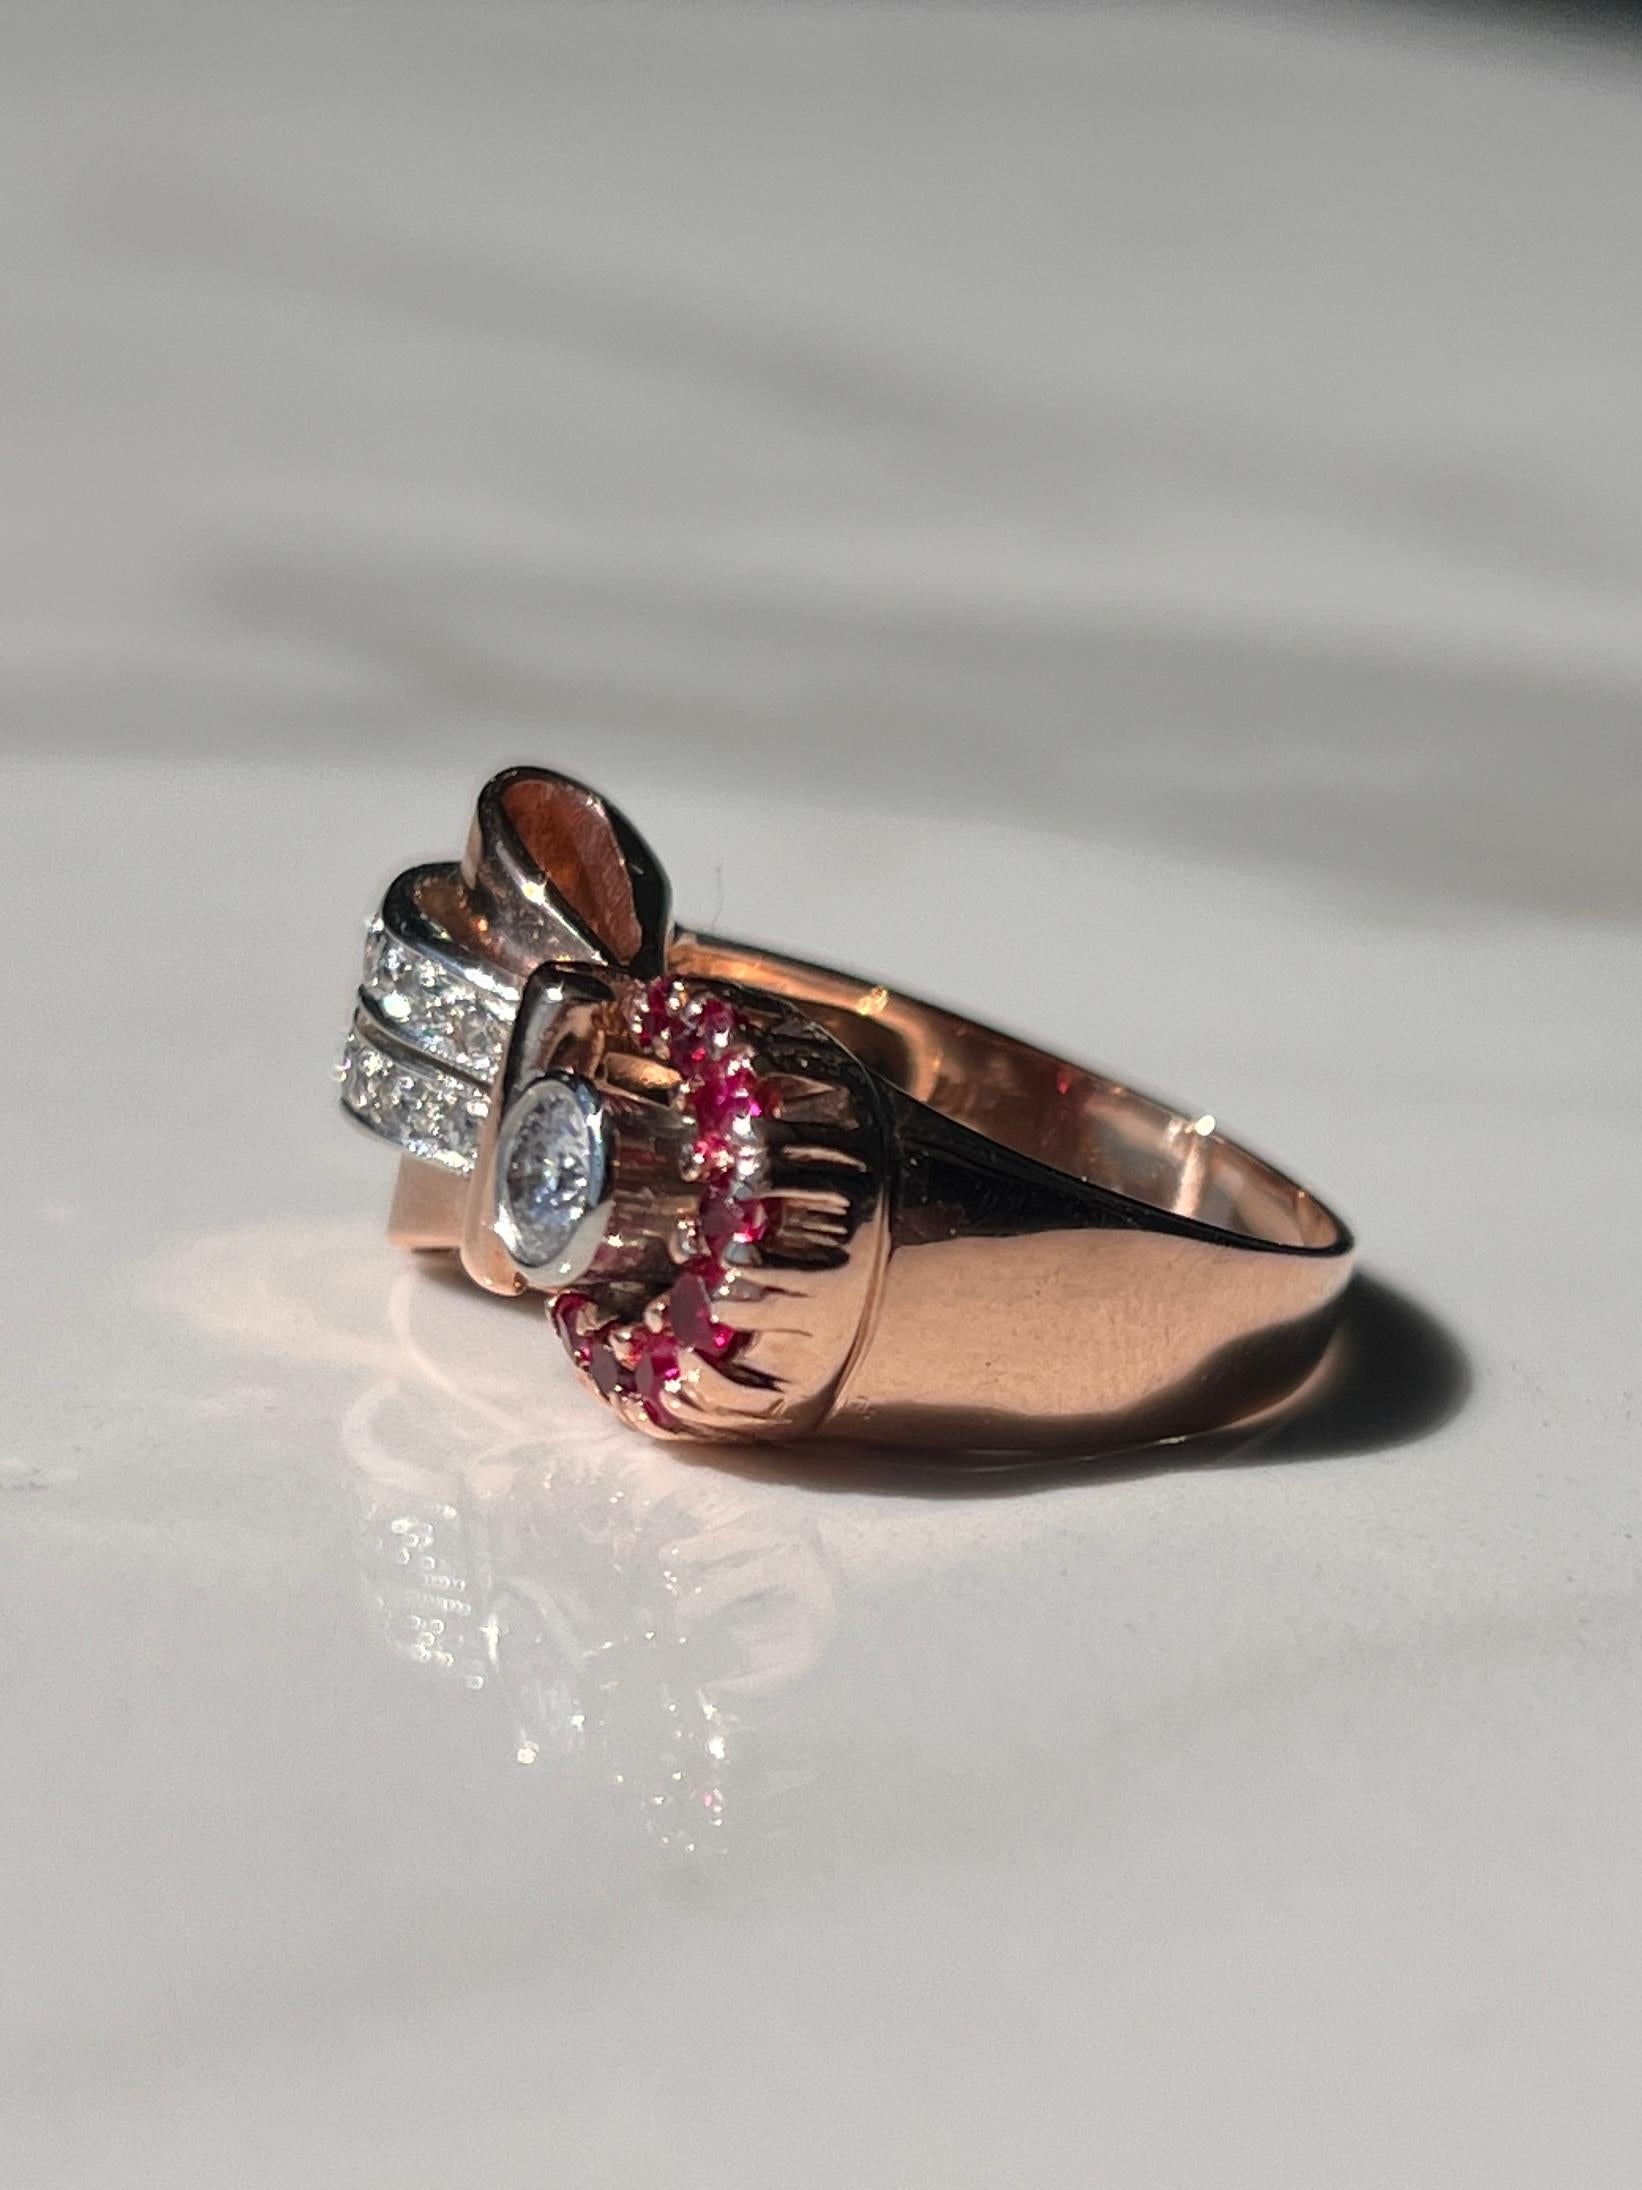 Brilliant Cut Natural Rudy & Diamond Retro Ring 14kt Rose Gold For Sale